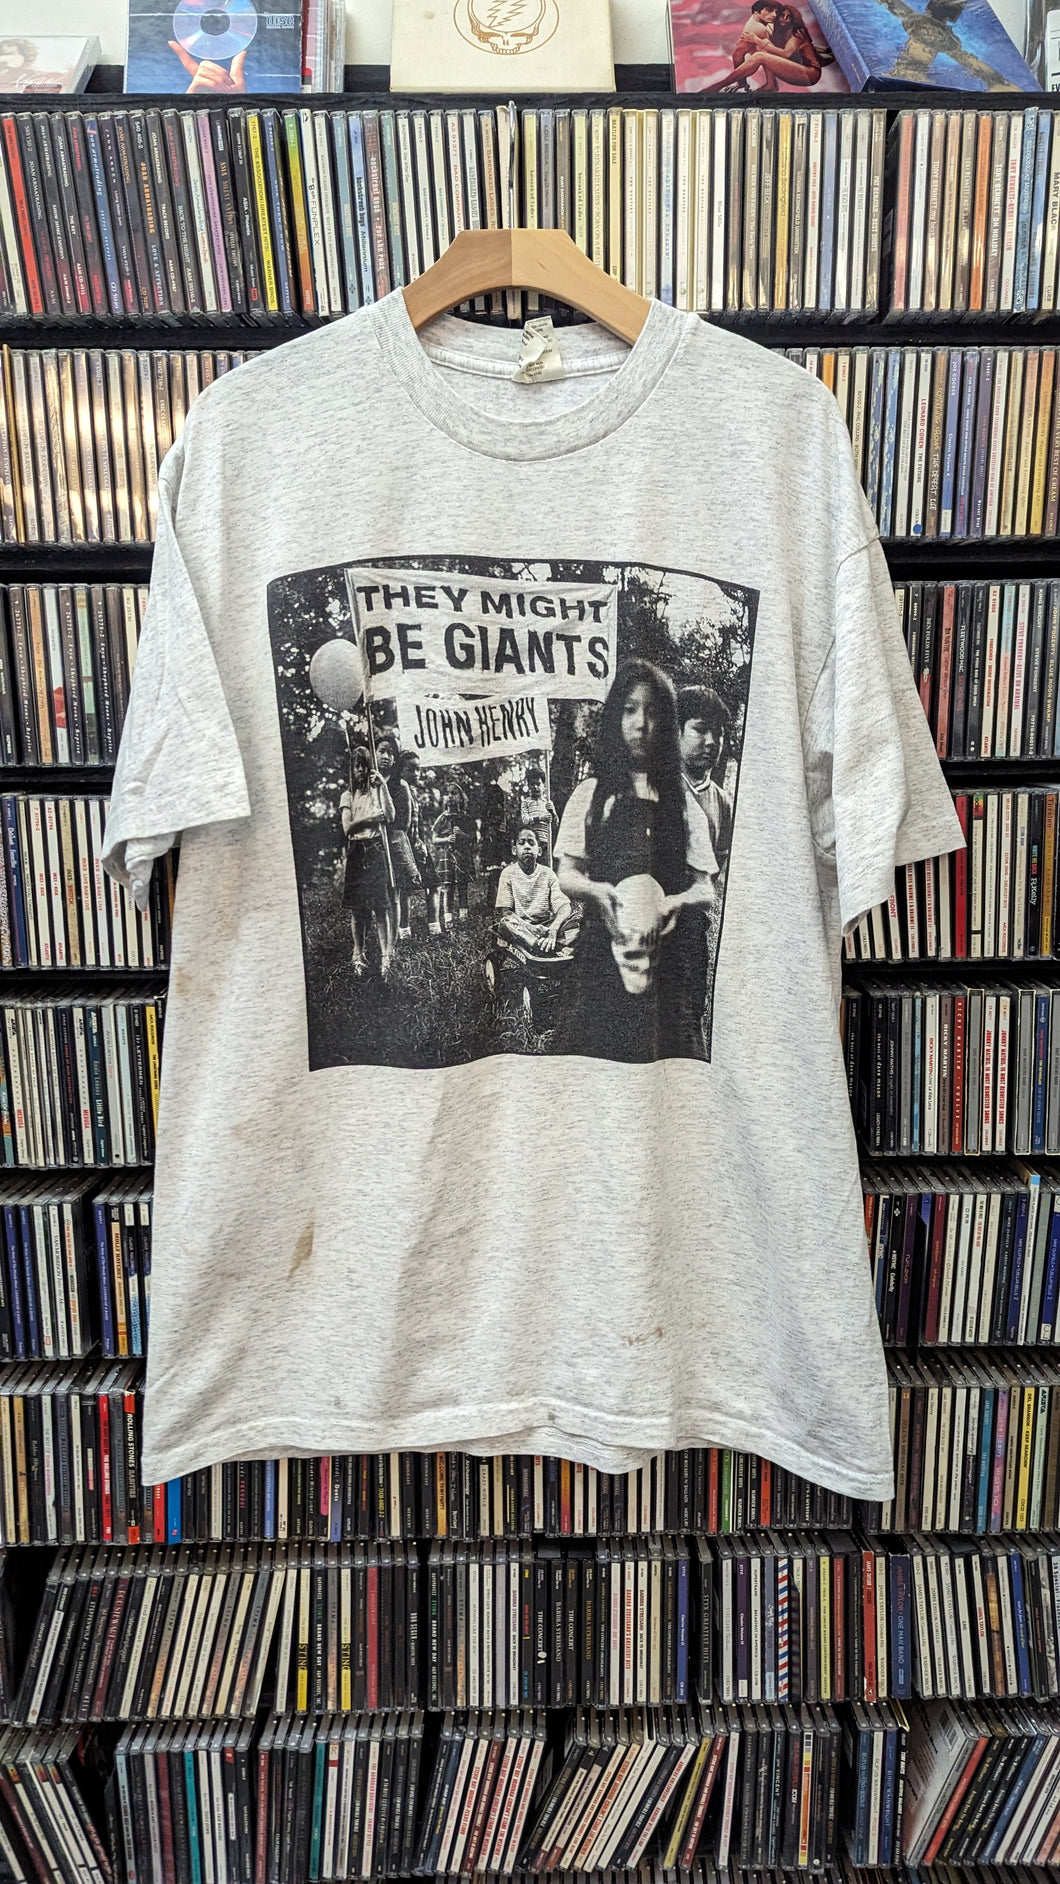 THEY MIGHT BE GIANTS VINTAGE BAND SHIRT XL